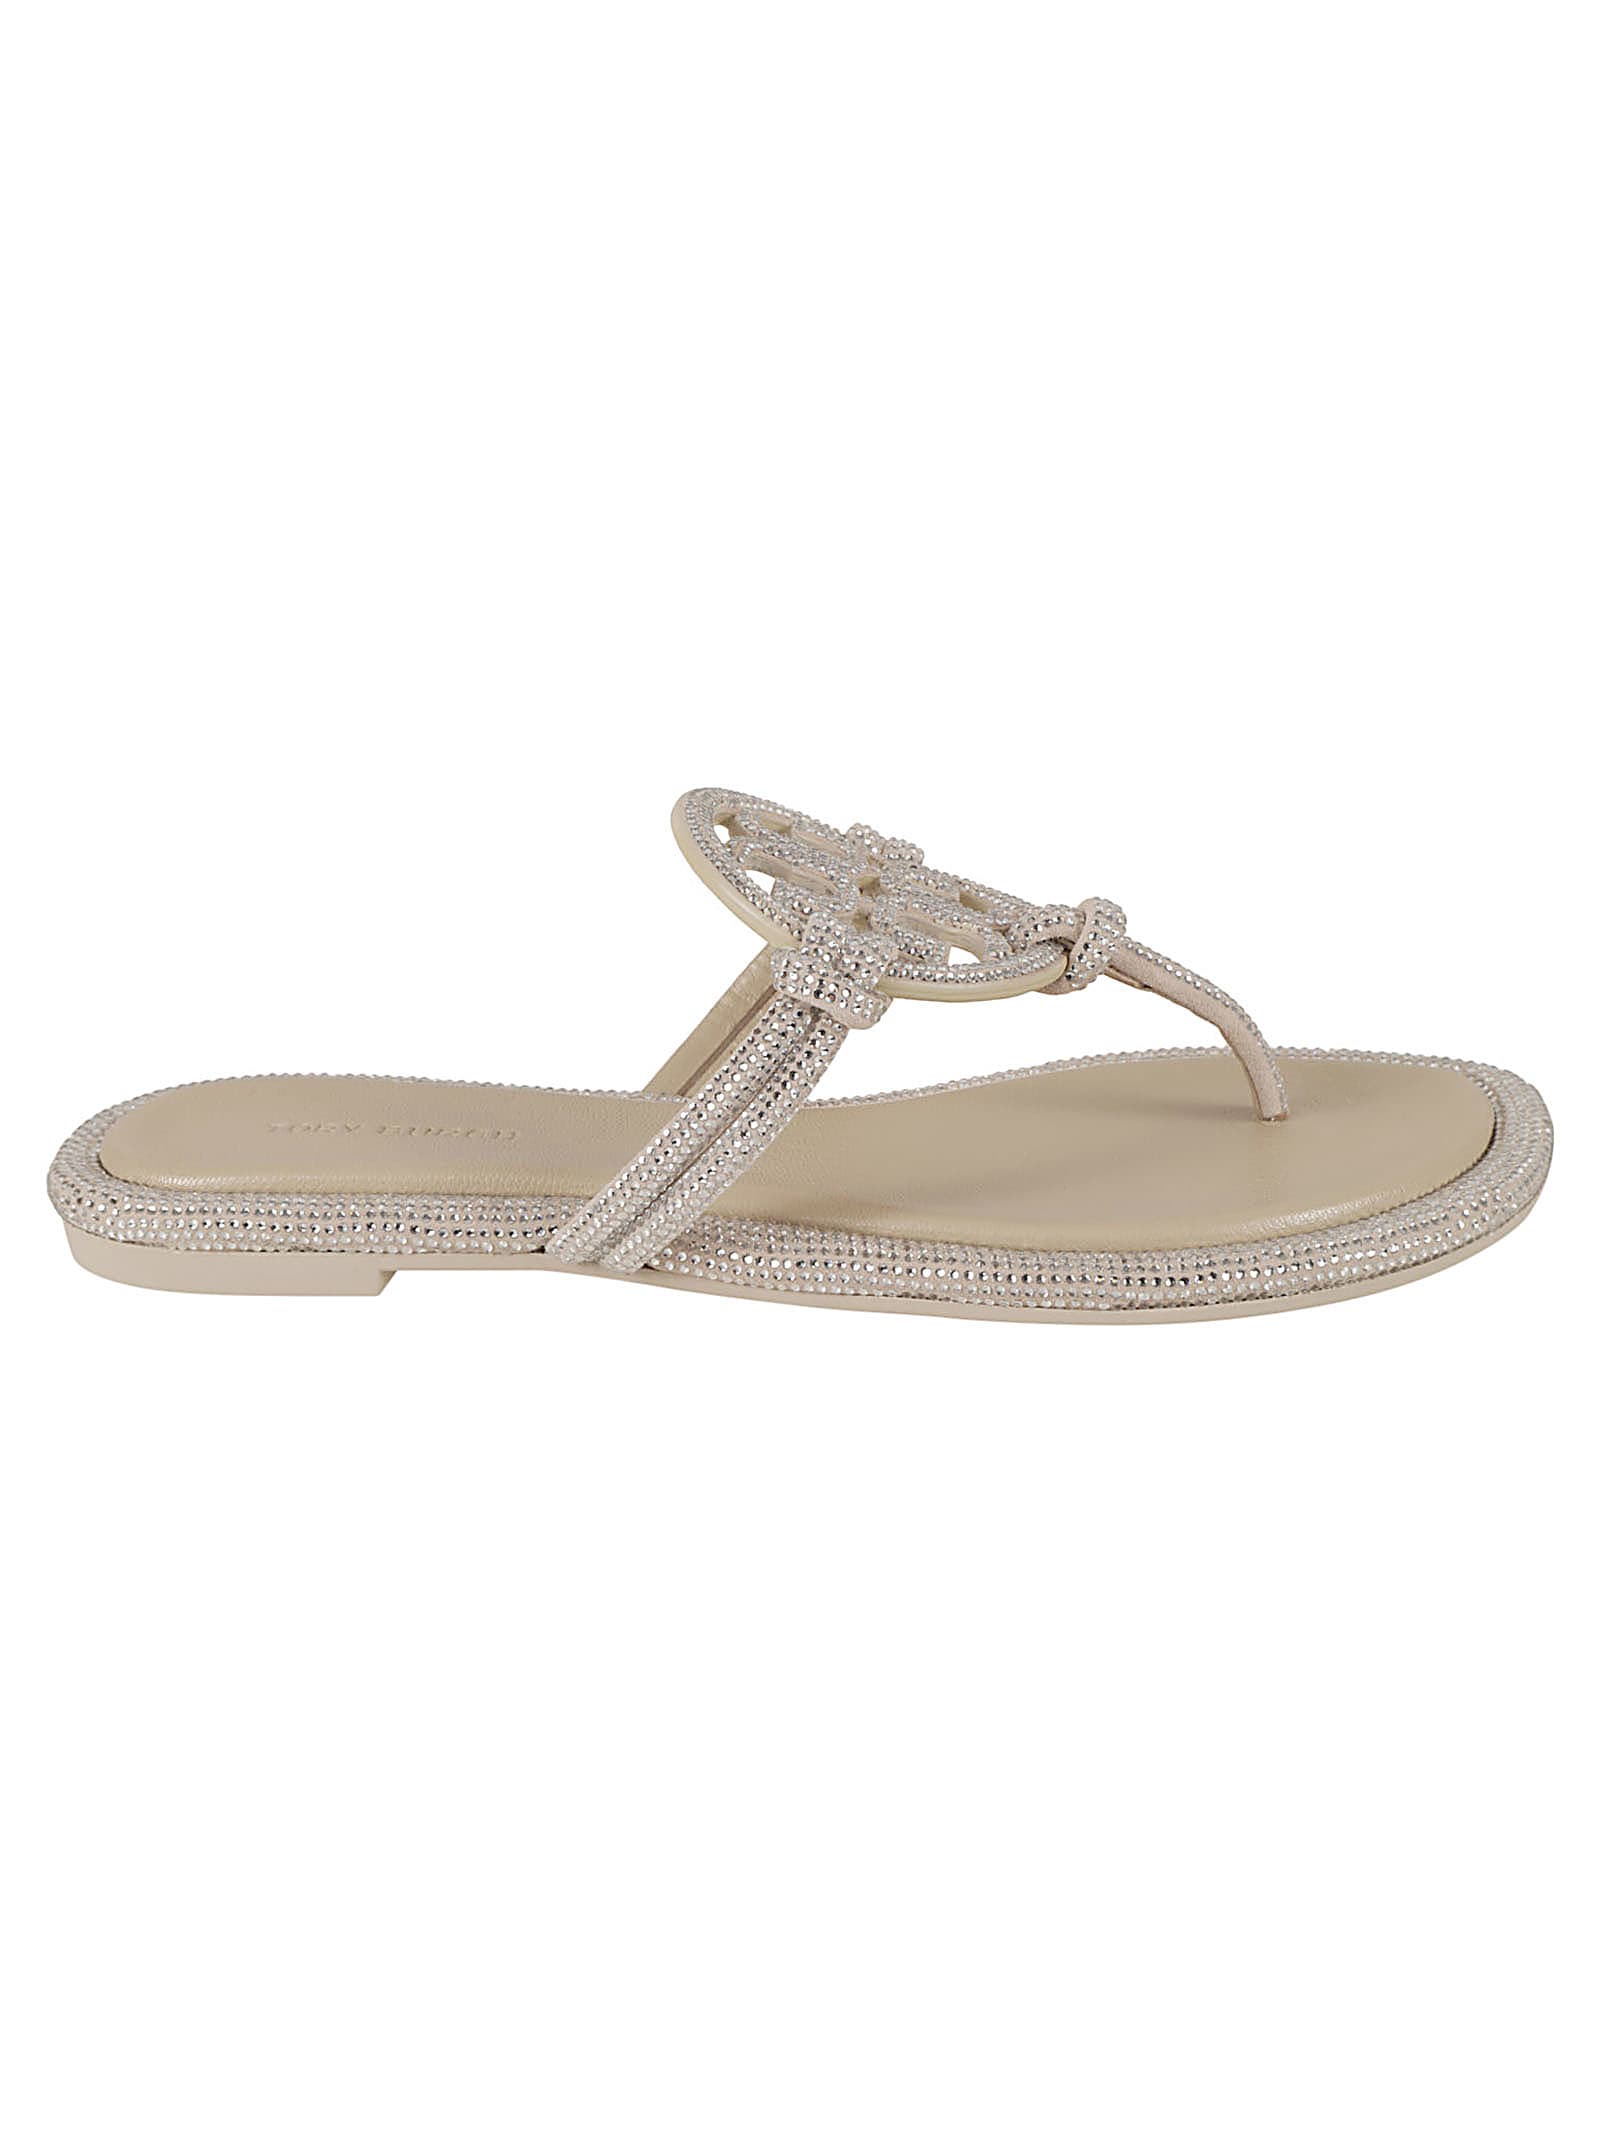 Shop Tory Burch Miller Knotted Embellished Ballerinas In Stone Grey